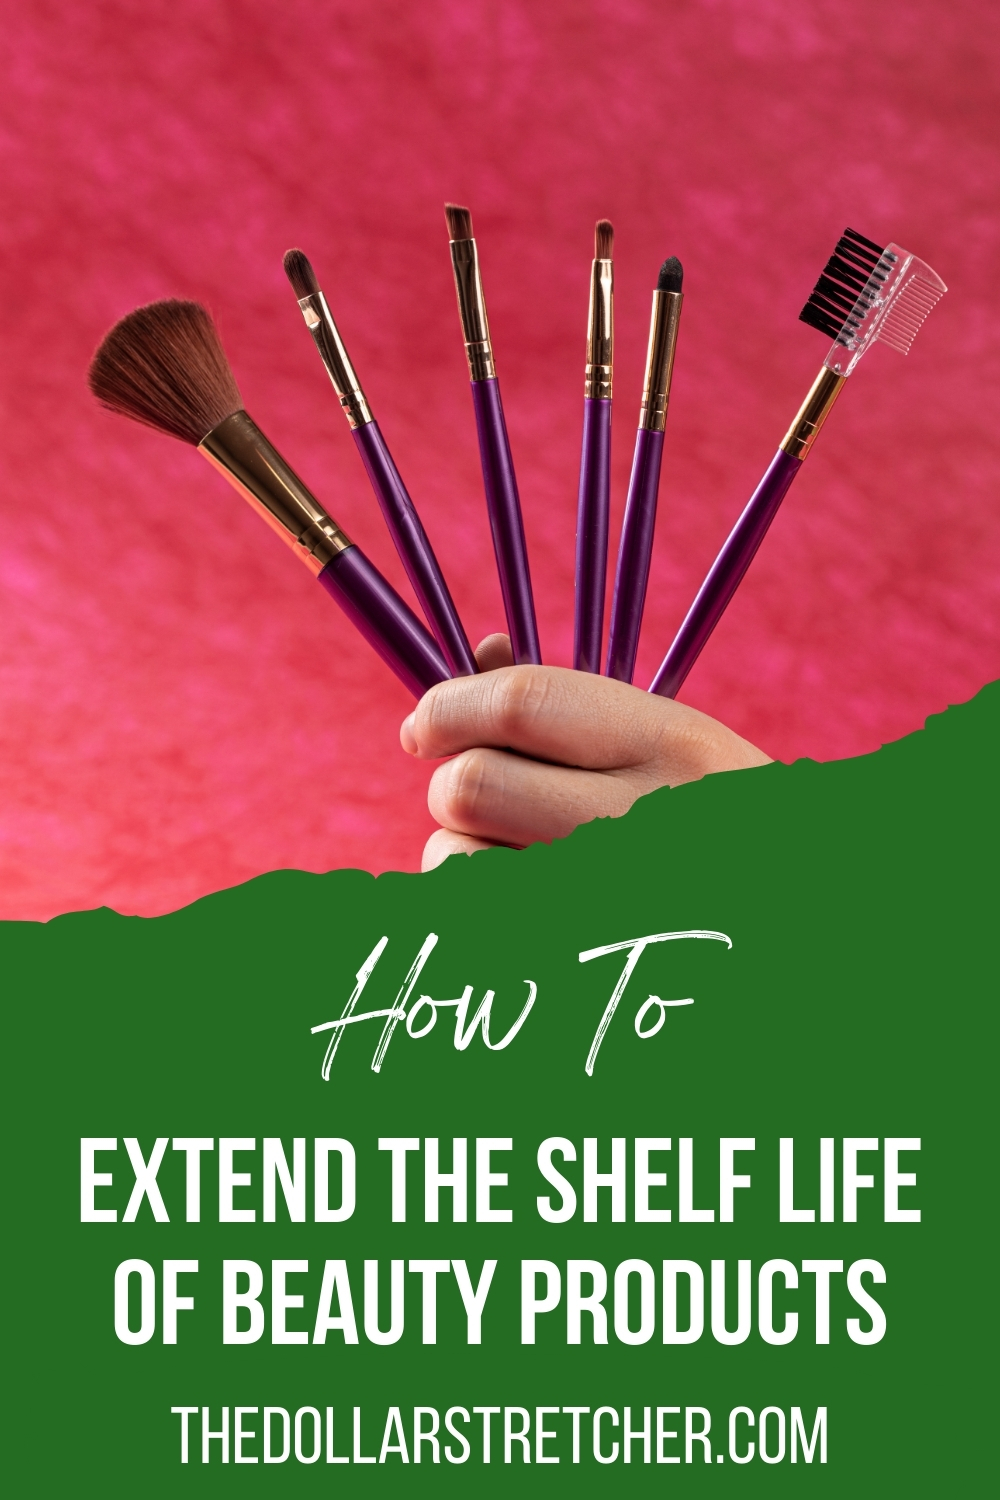 How To Extend the Shelf Life of Beauty Products PIN